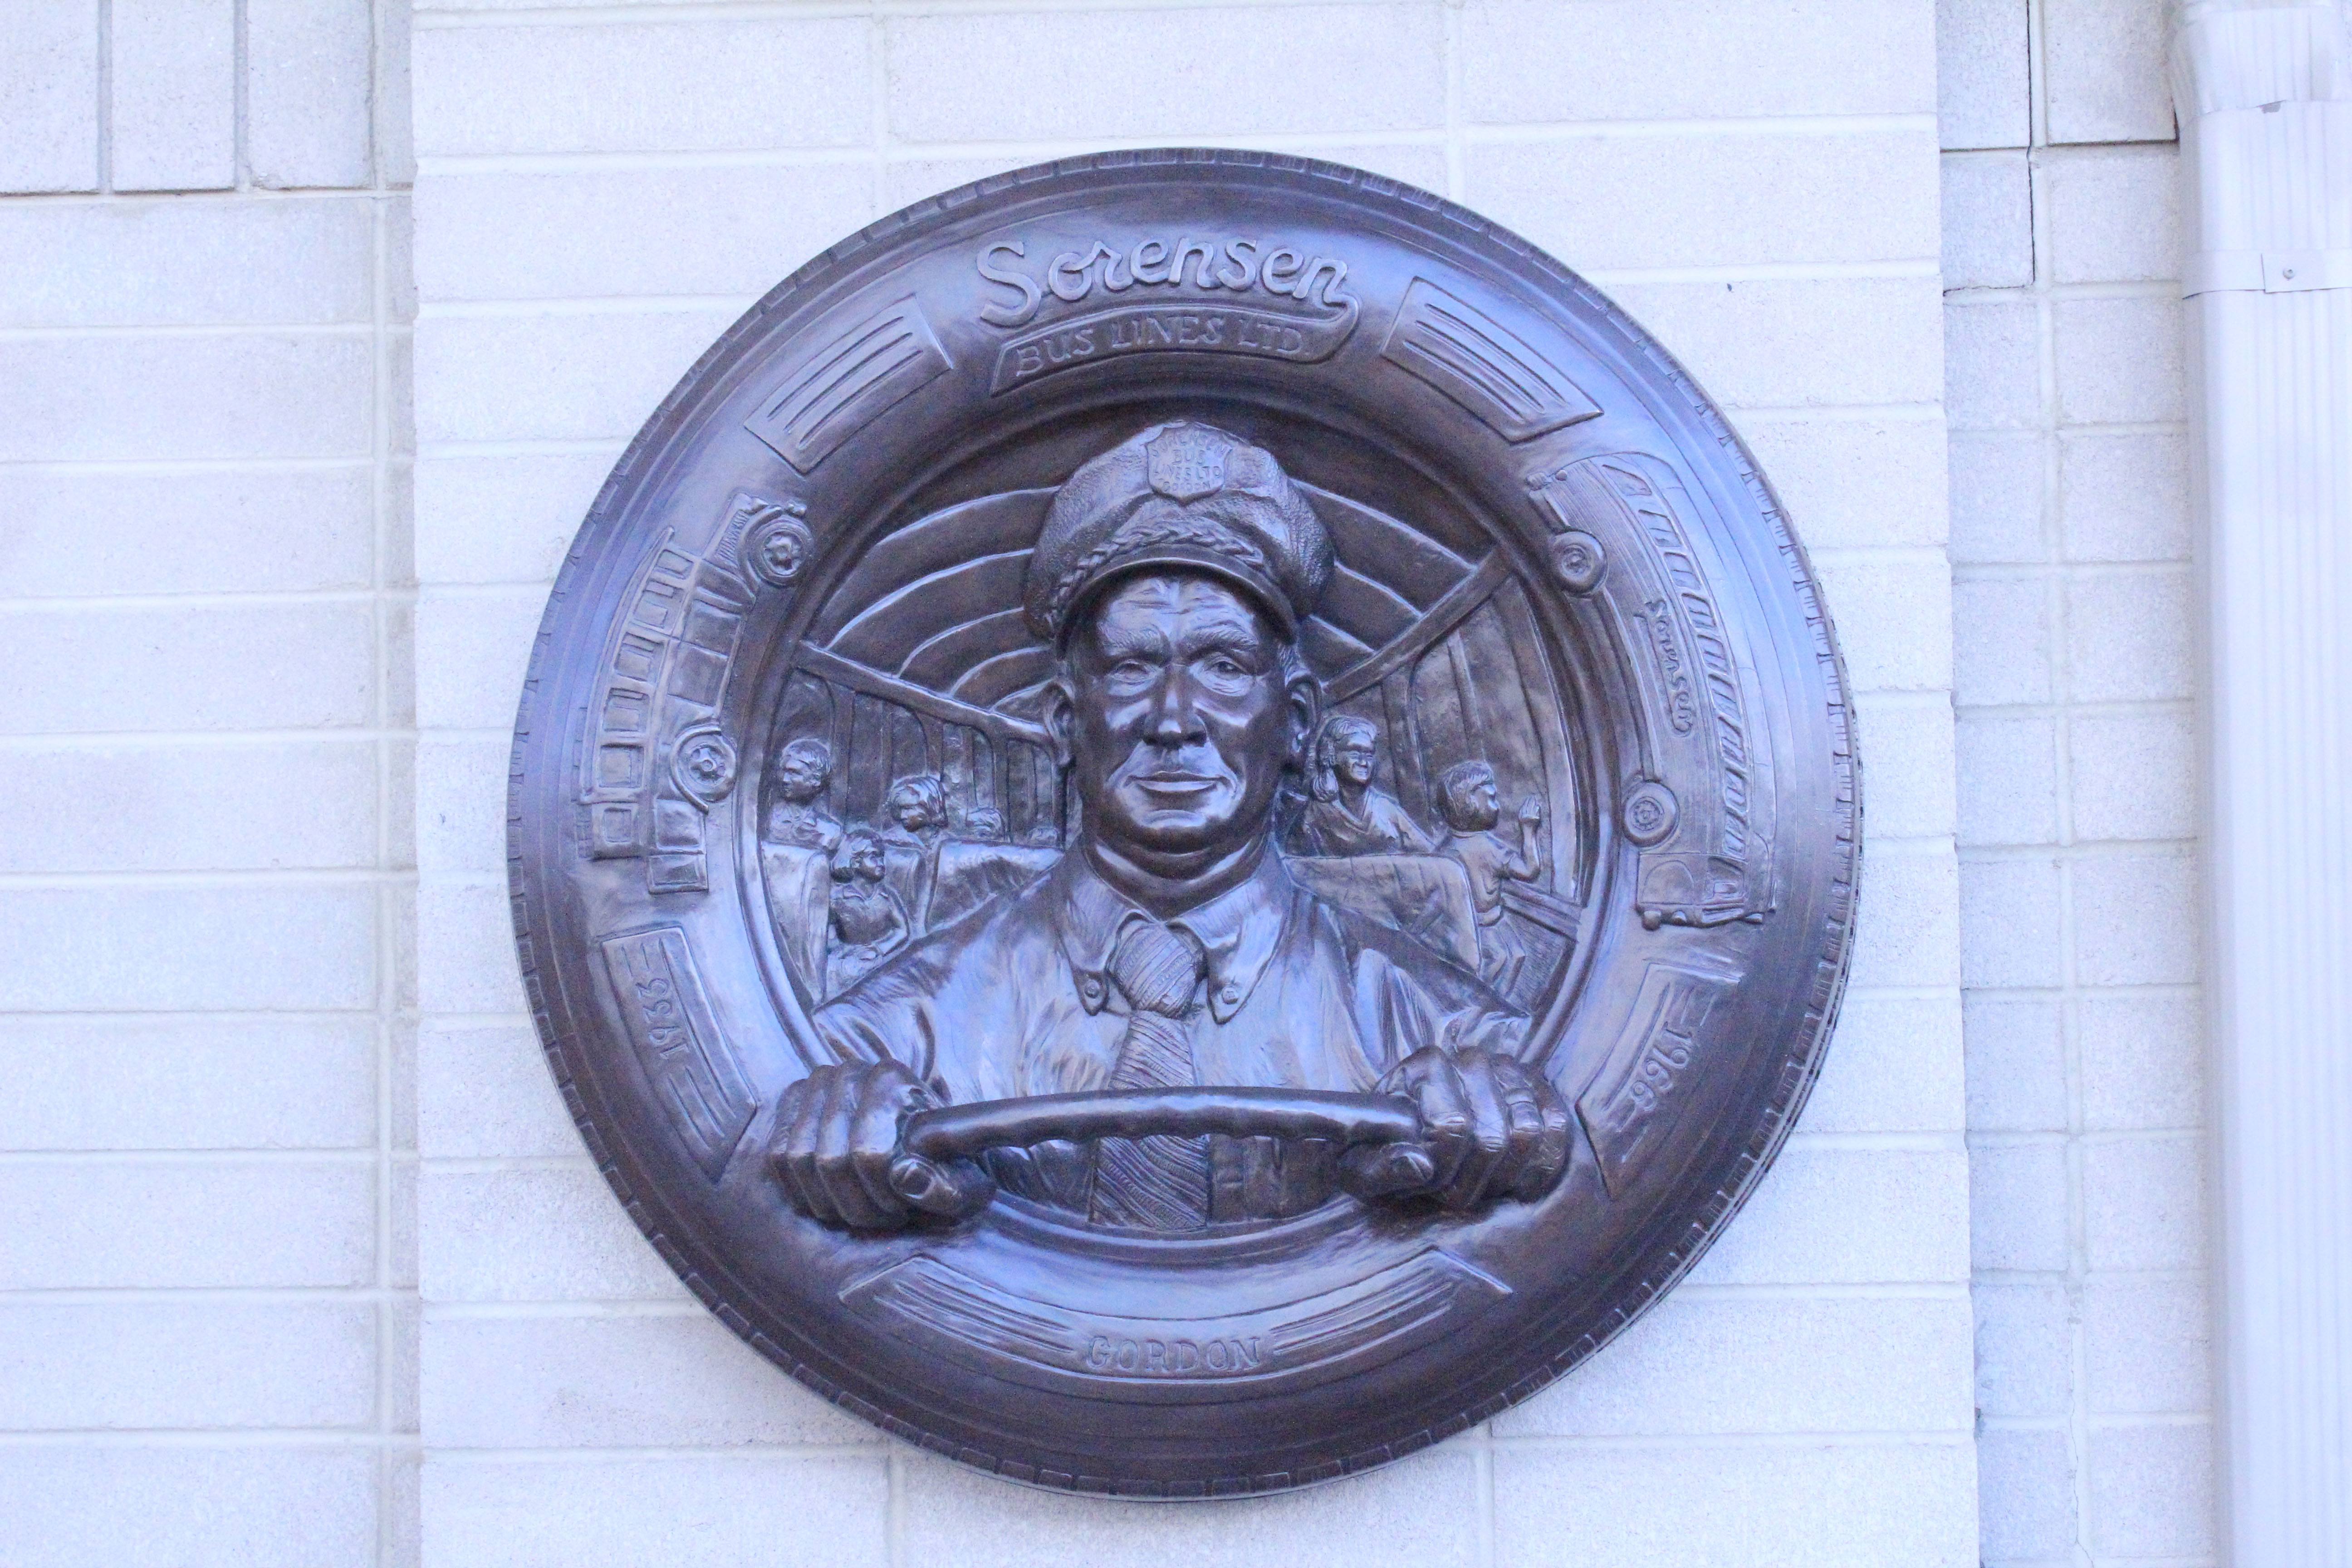 REMEMBERED- This roundel features Gordon Sorensen's face as part of a six-part sculpture of Julietta and Gordon Sorensen. All six sculptures can be found at the Sorensen bus terminal down town Red Deer that is also named after the couple.